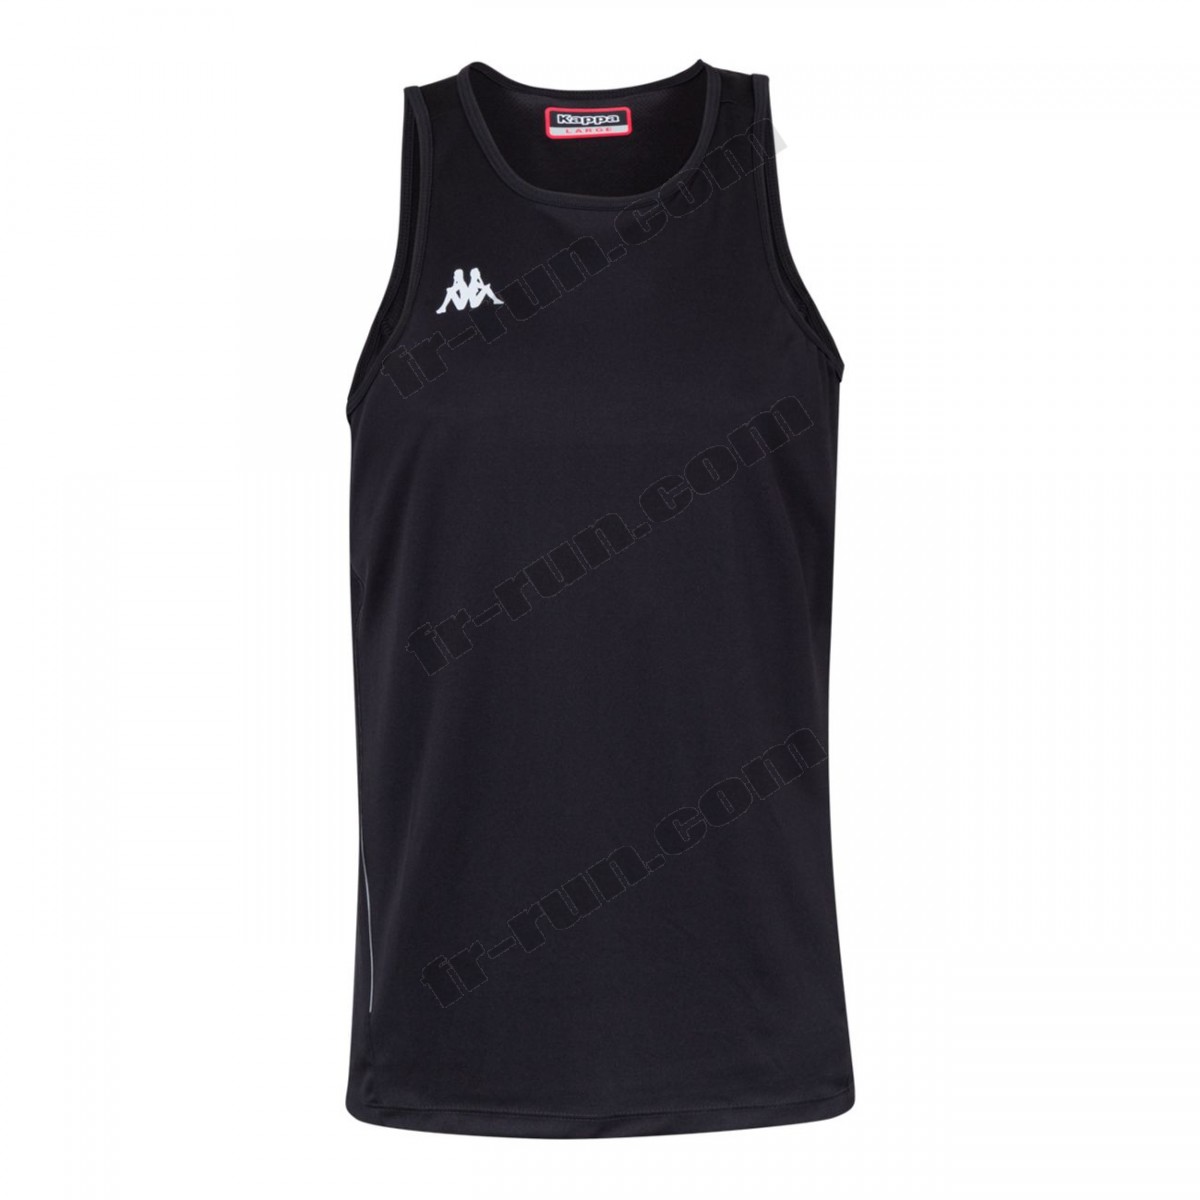 Kappa/running homme KAPPA Maillot manches courtes FANTO - Noir - Homme √ Nouveau style √ Soldes - -2